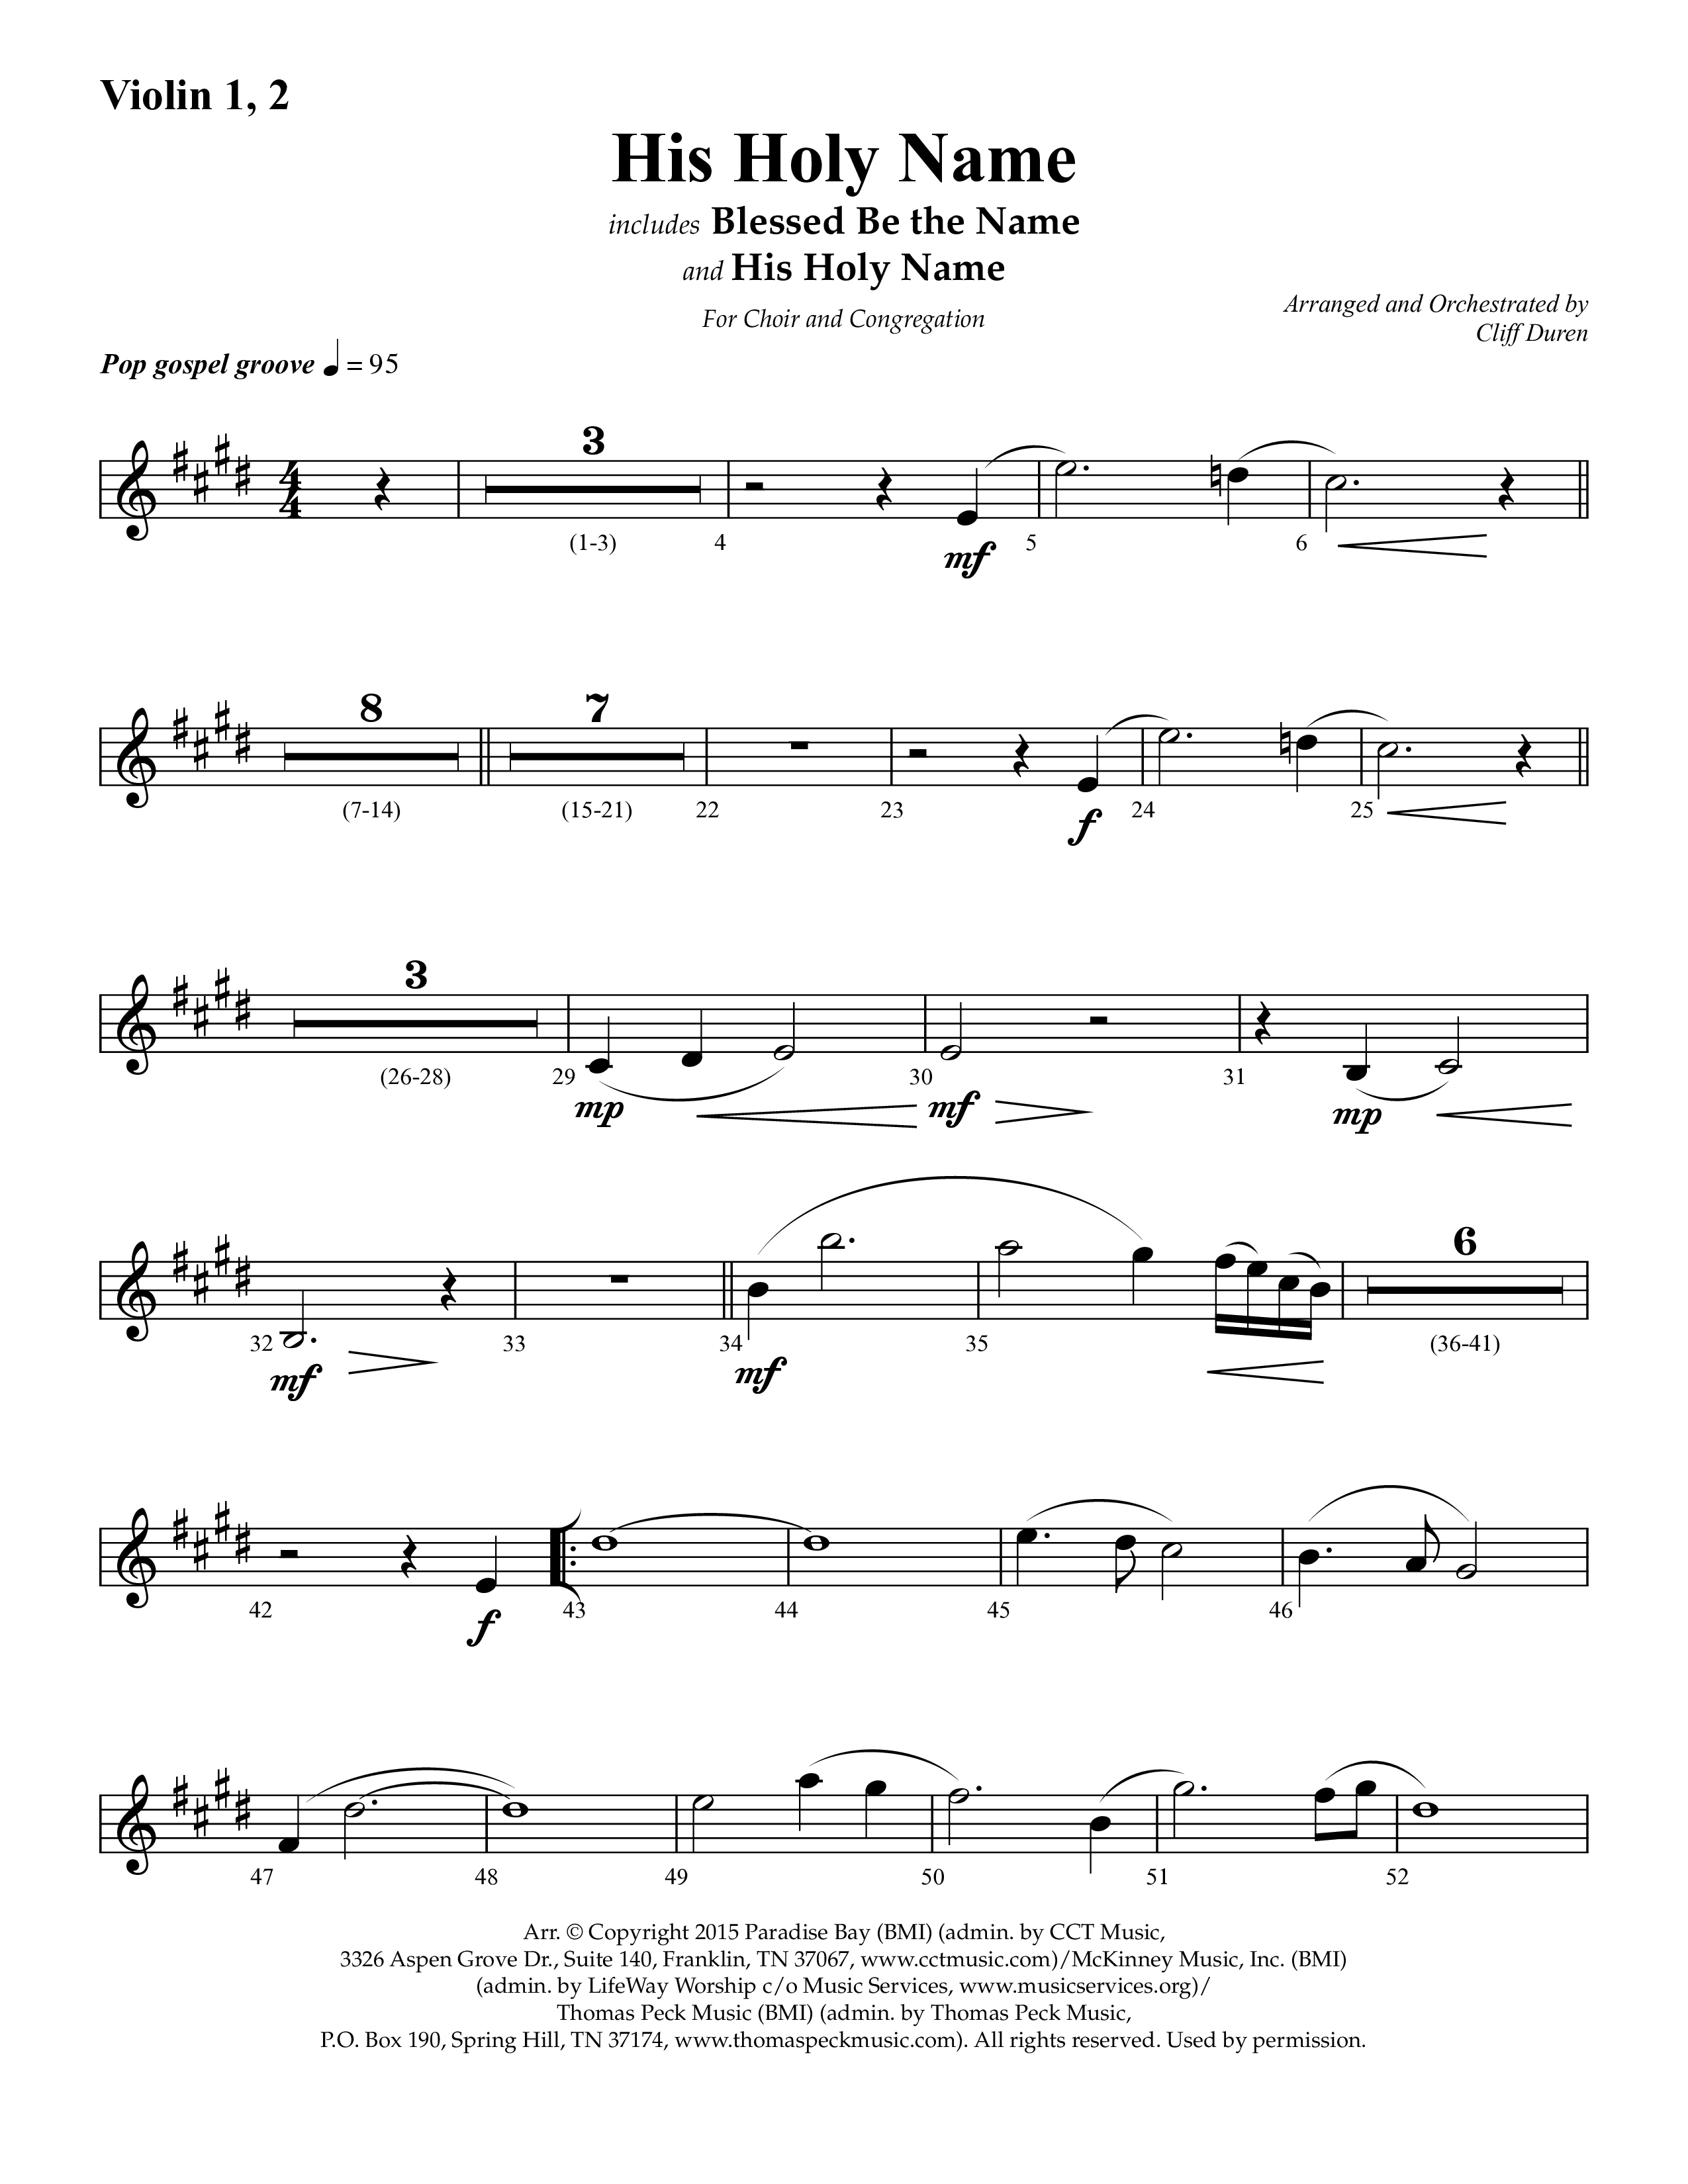 His Holy Name (with Blessed Be The Name) (Choral Anthem SATB) Violin 1/2 (Lifeway Choral / Arr. Cliff Duren)